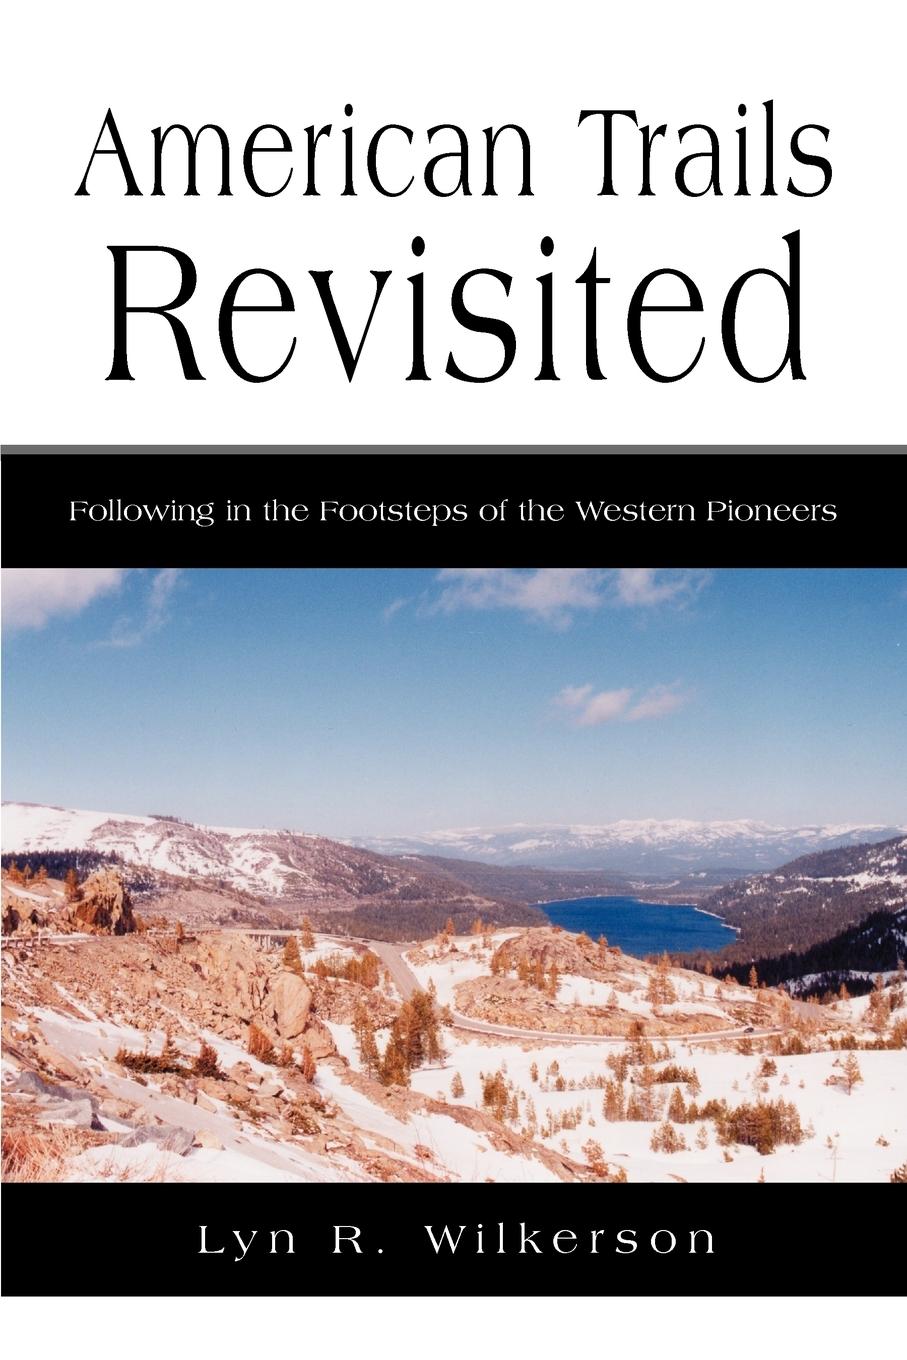 American Trails Revisited: Following in the Footsteps of the Western Pioneers - Wilkerson, Lyn R.